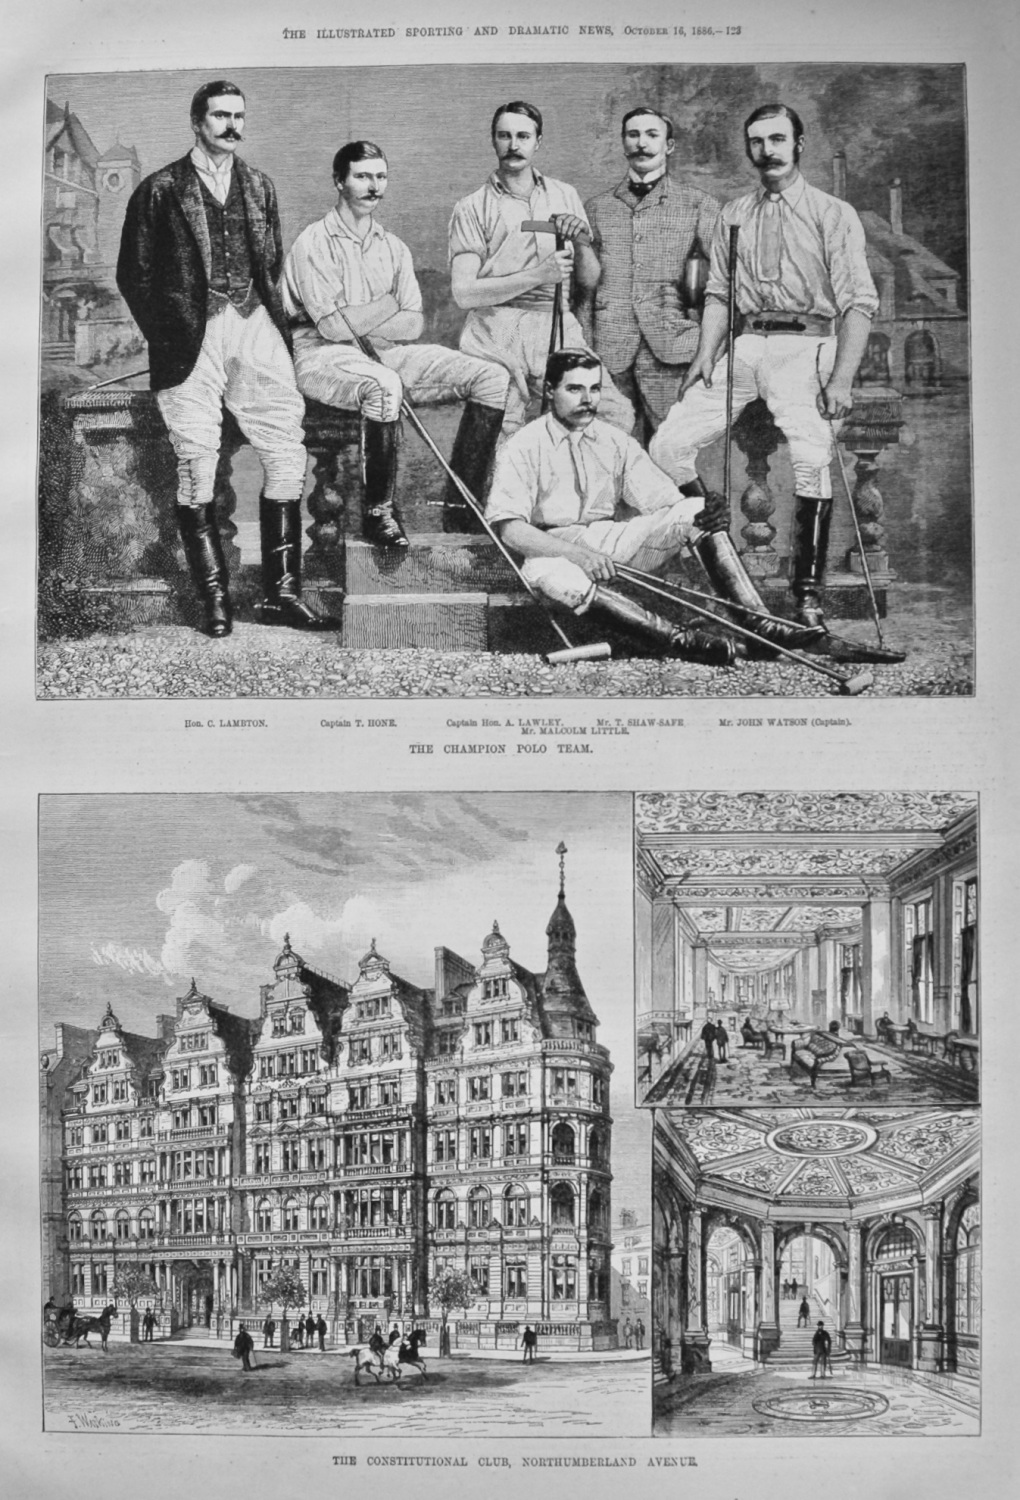 The Constitutional Club, Northumberland Avenue. & The Champion Polo Team. 1